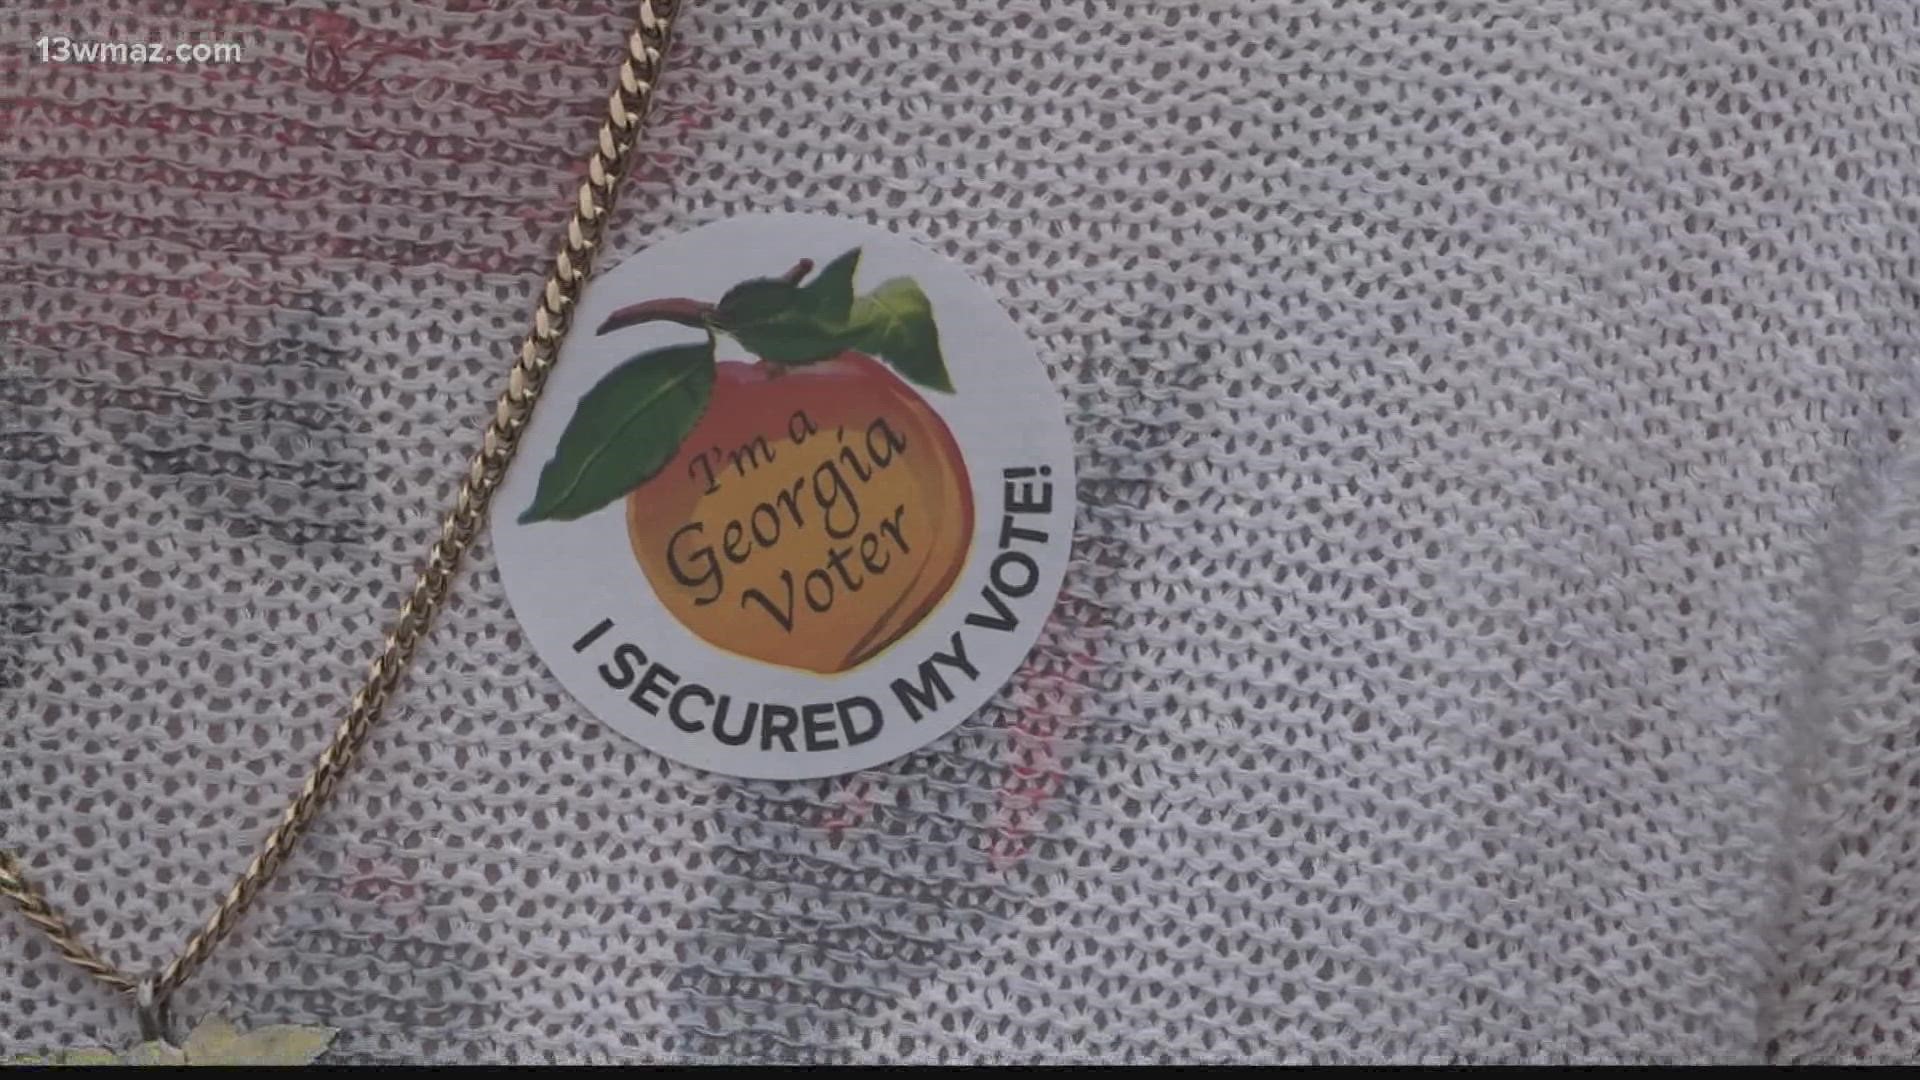 Tuesday morning, there were concerns of voter machine glitches in Fort Valley, but they were fixed and back up and running in a couple of hours.